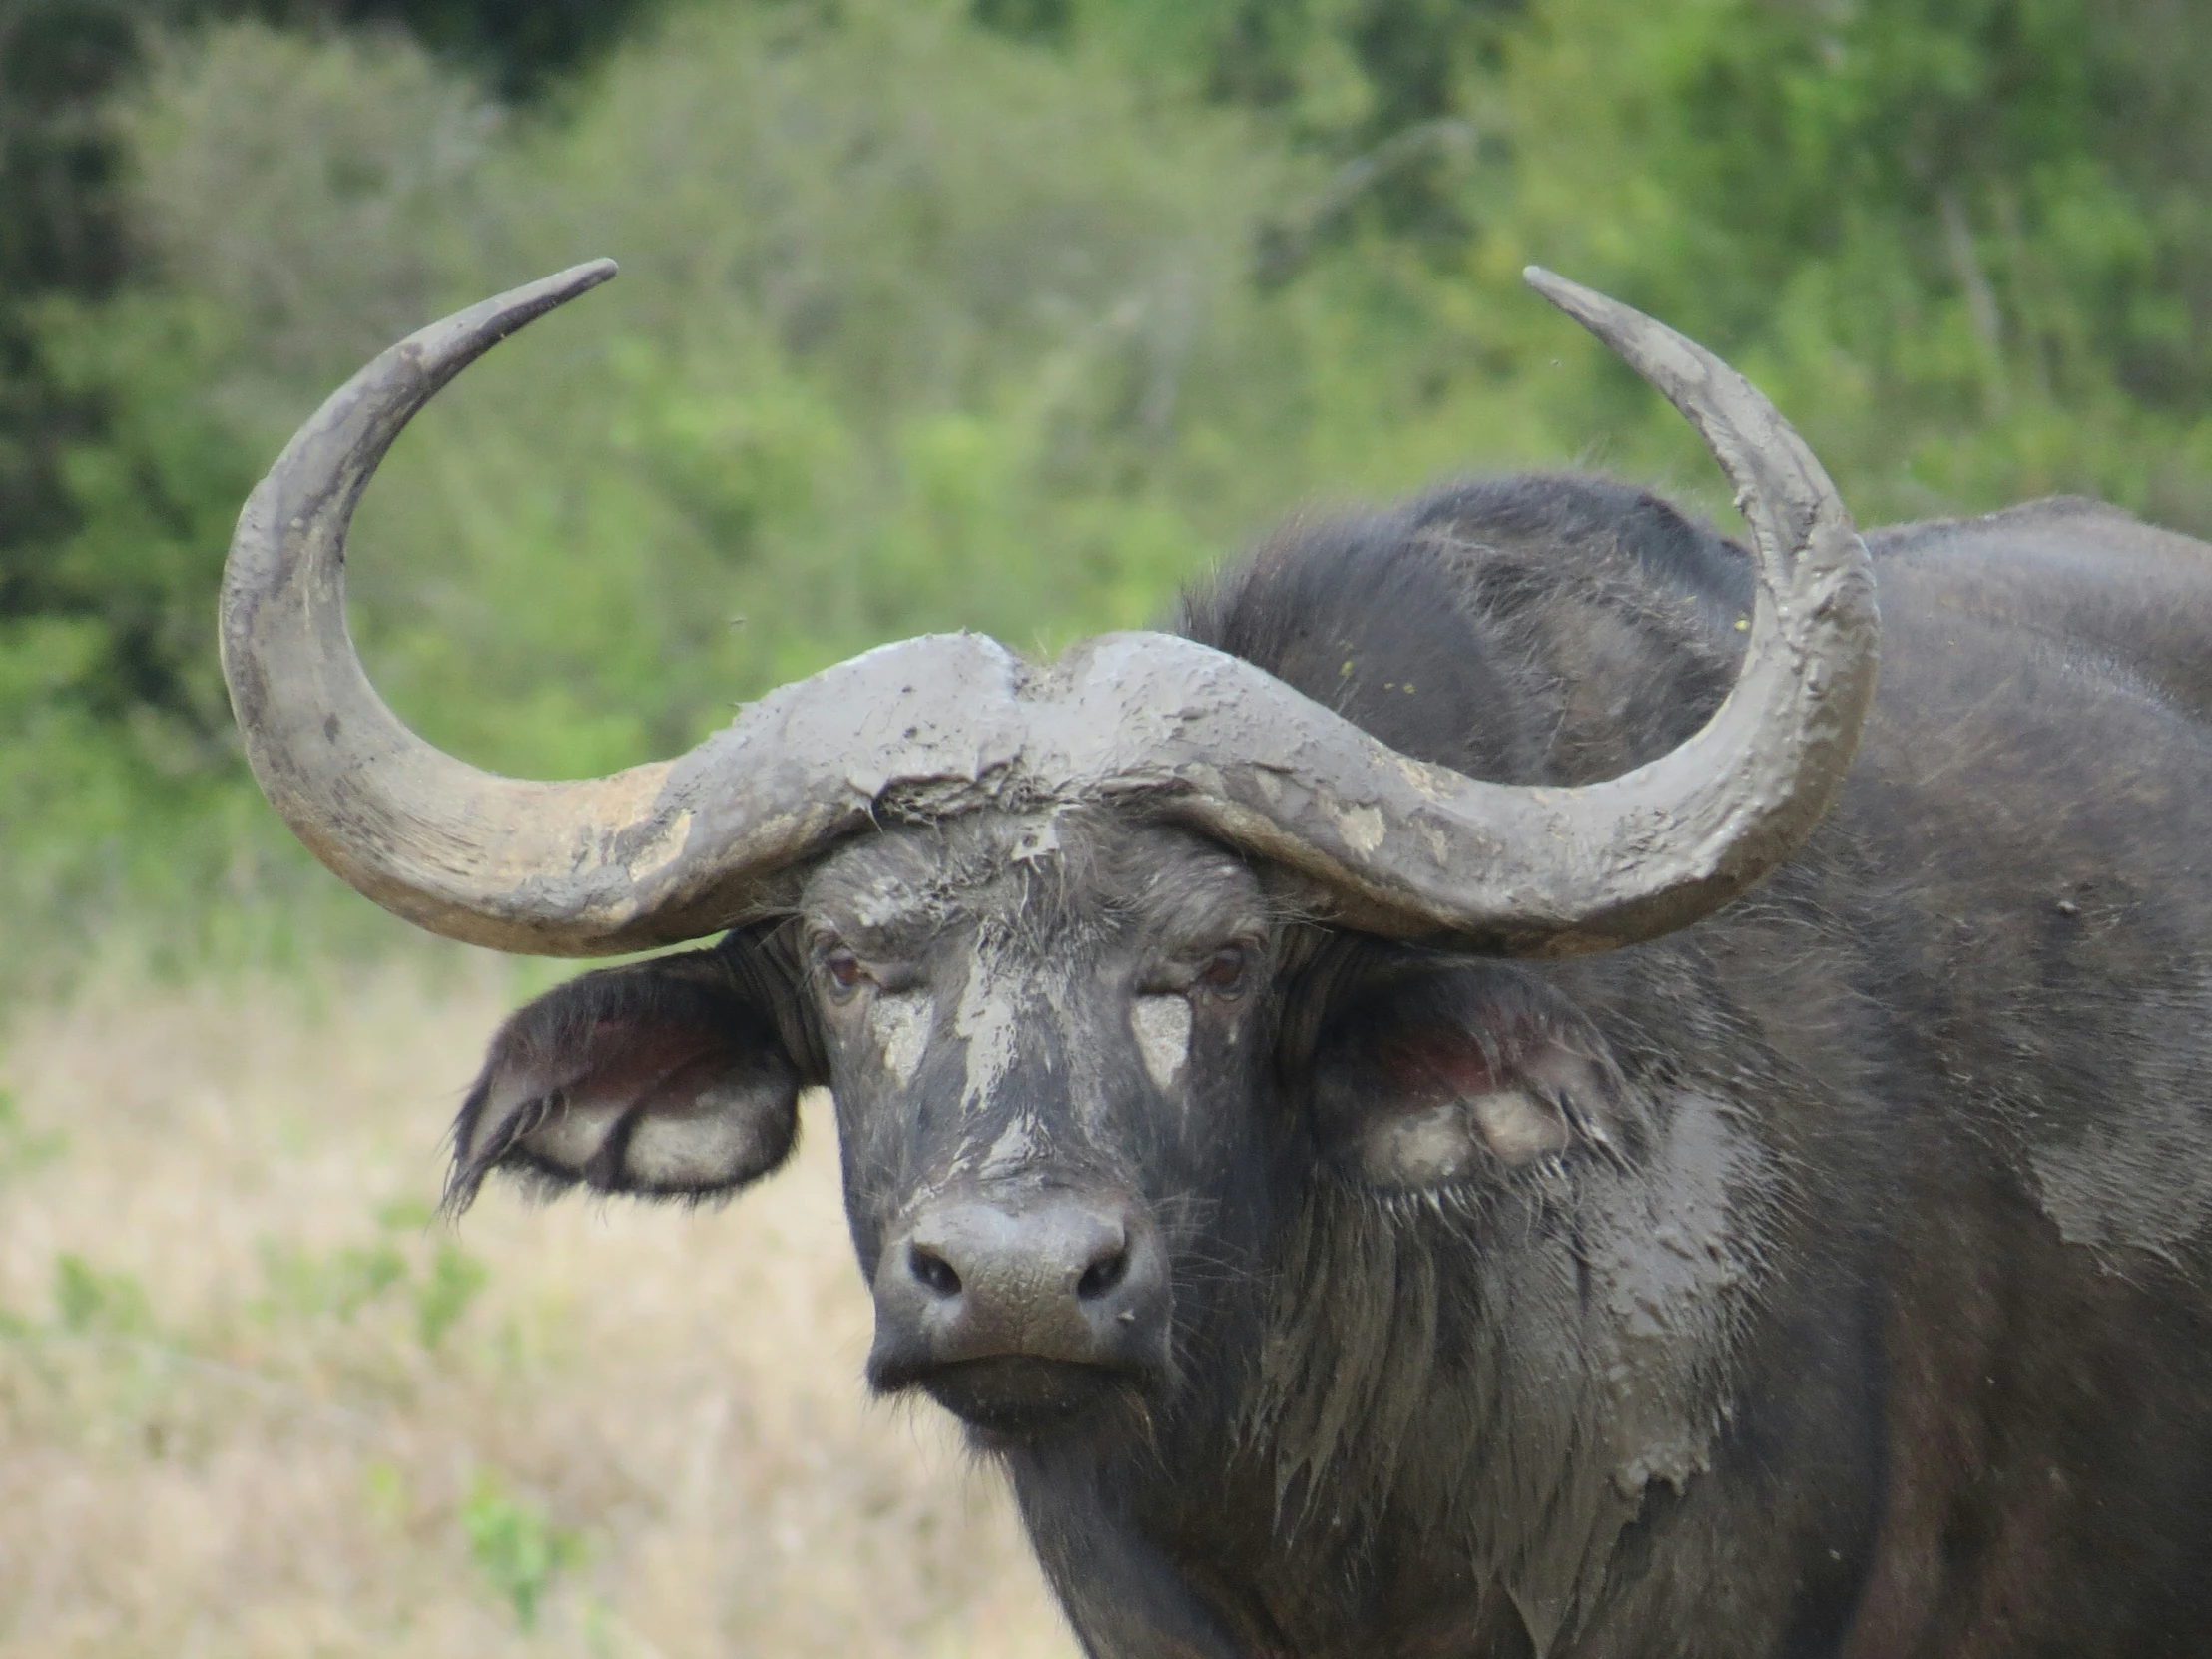 a large bull with massive horns standing in a field